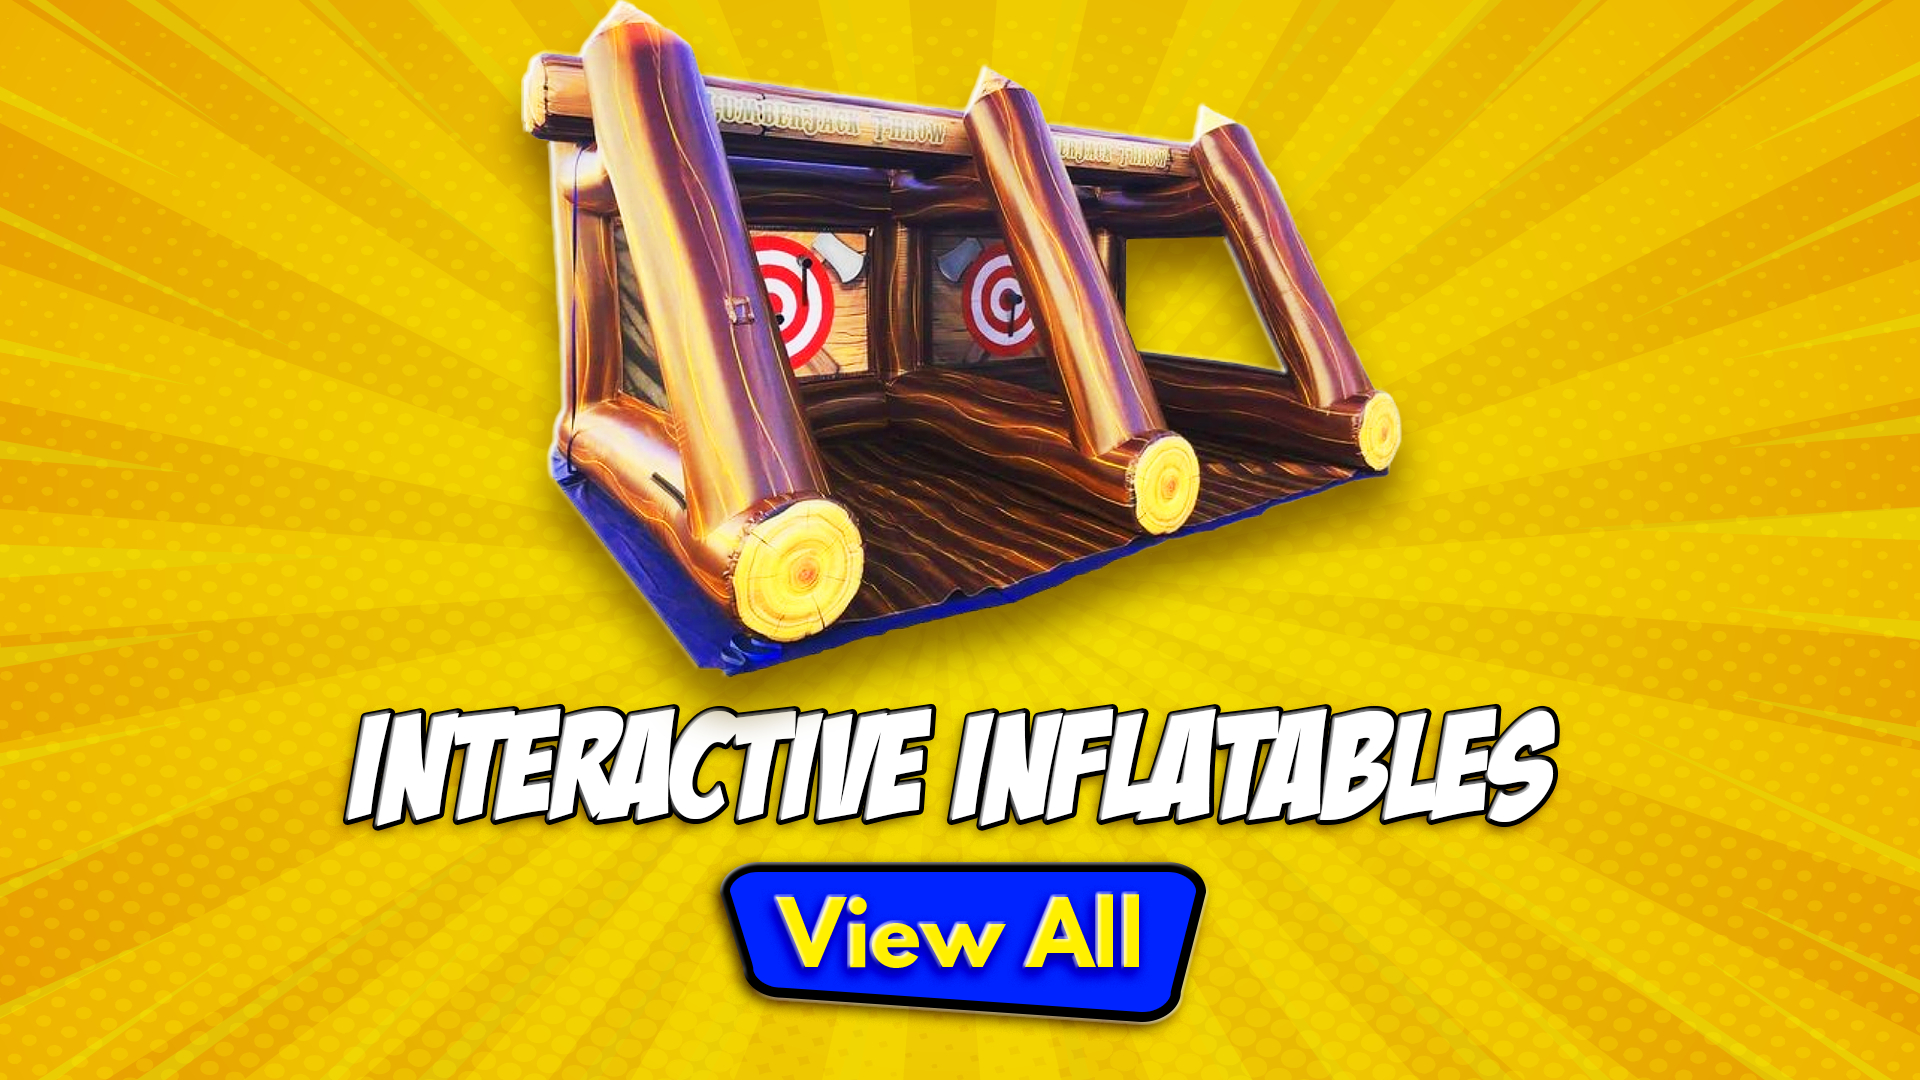 Mountain View Interactive Inflatable rentals